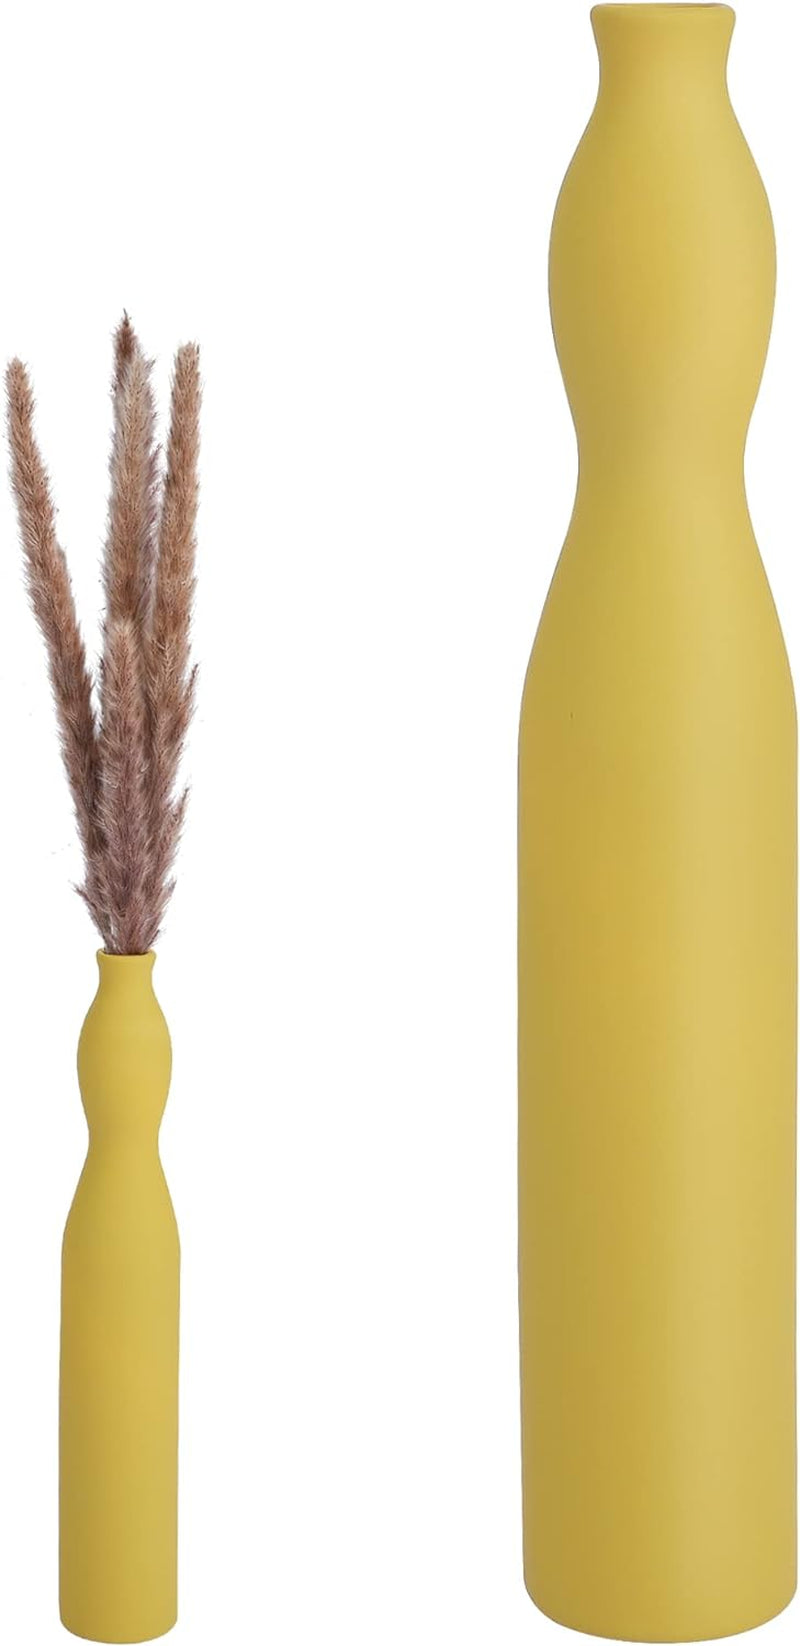 12.6 Inch Yellow Ceramic Vase, Tall Floor Vases with Narrow Neck, Geometric Thin Flower Vase for Bookshelf, Mantle, Entryway Decor [Pampas Not Included]